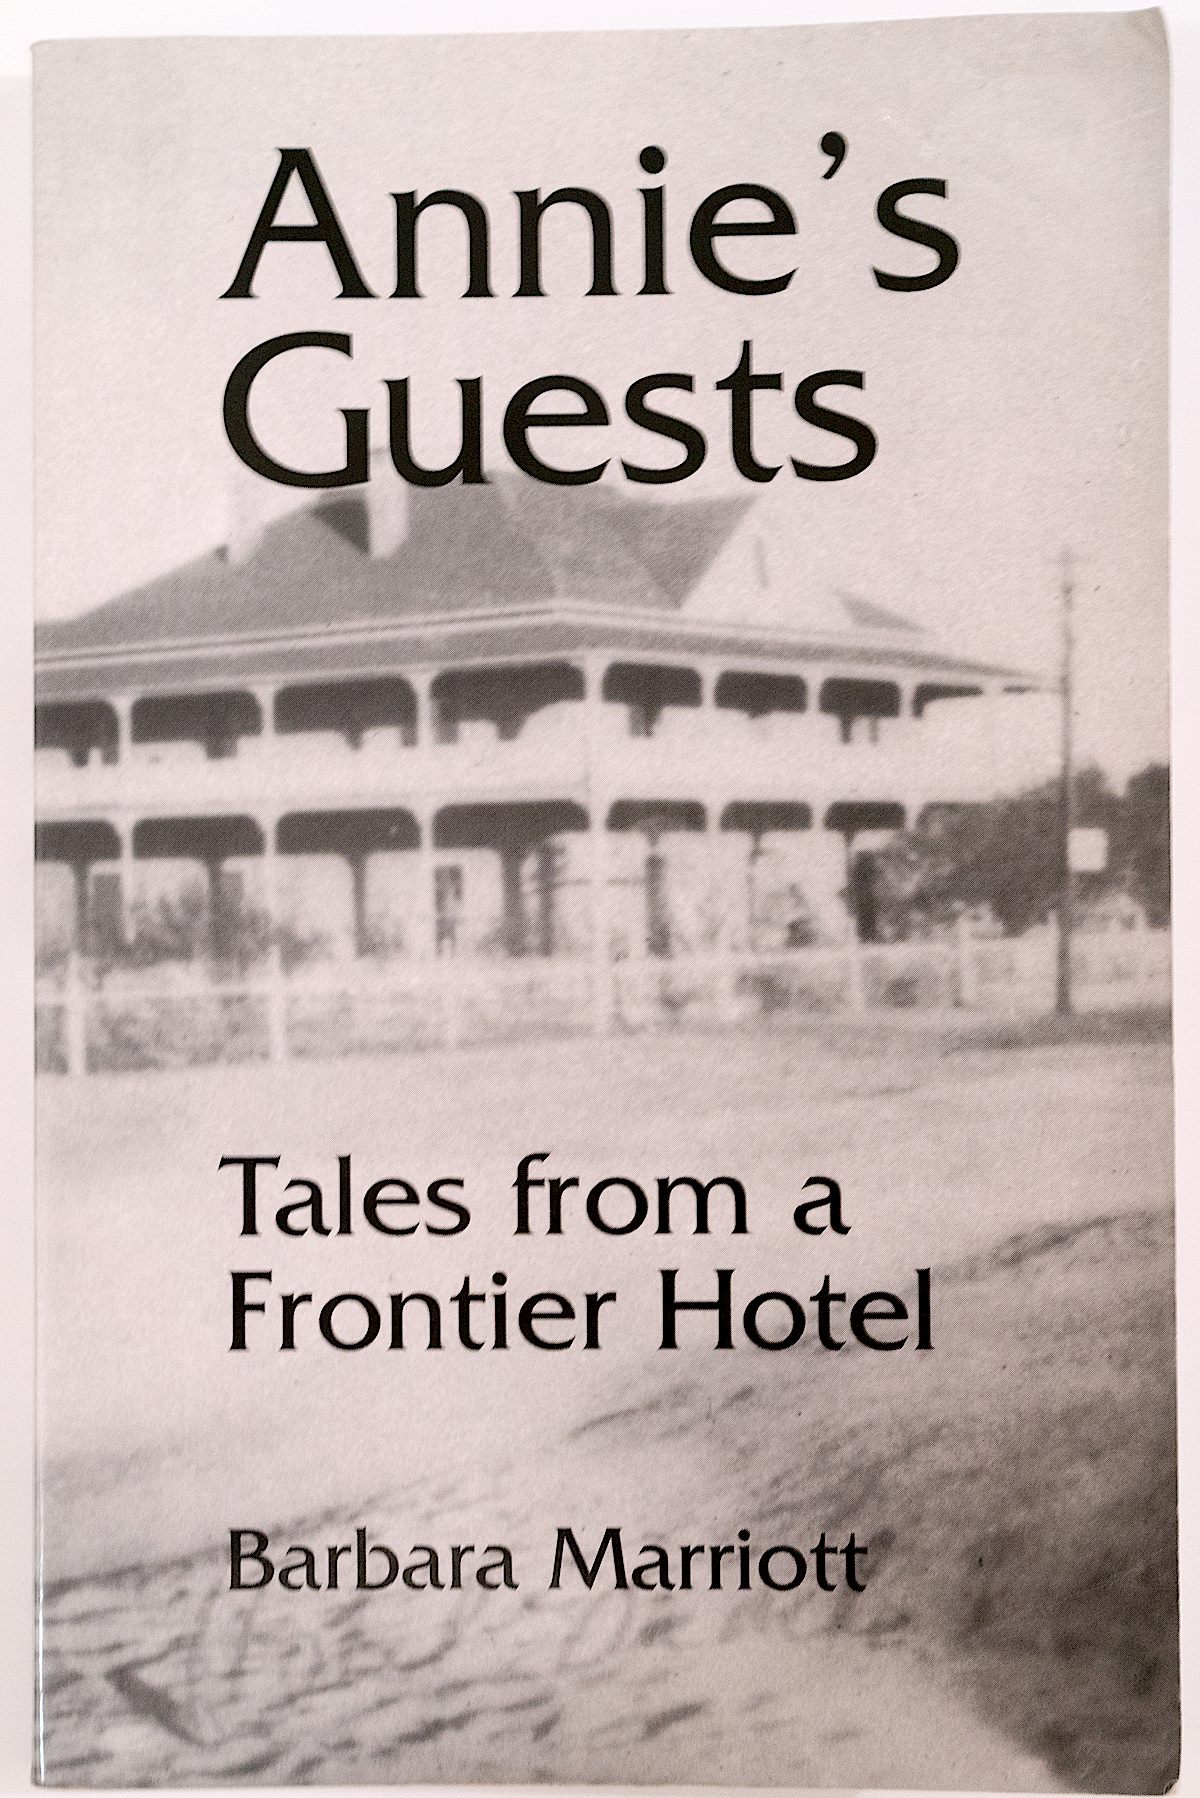 Annie's Guests, Tales from a Frontier Hotel. December 2016.